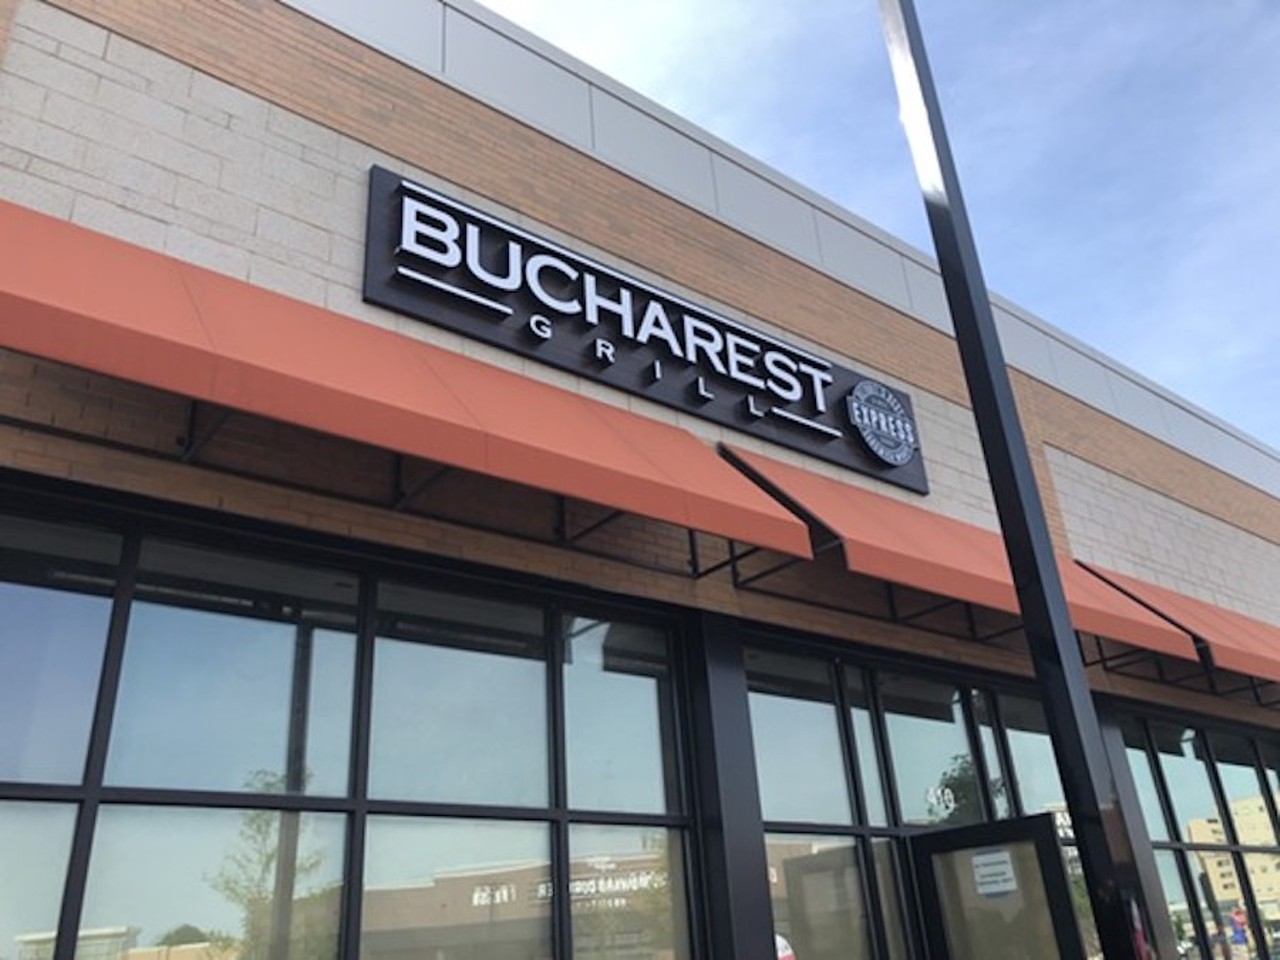 Bucharest Grill Express
30955 Woodward Ave., Royal Oak; 313-965-3111; bucharestgrill.com
Popular shawarma chain Bucharest Grill opened in Royal Oak after months of delays, marking the fast-casual restaurant&#146;s first location outside of Detroit. 
Photo by Lee DeVito